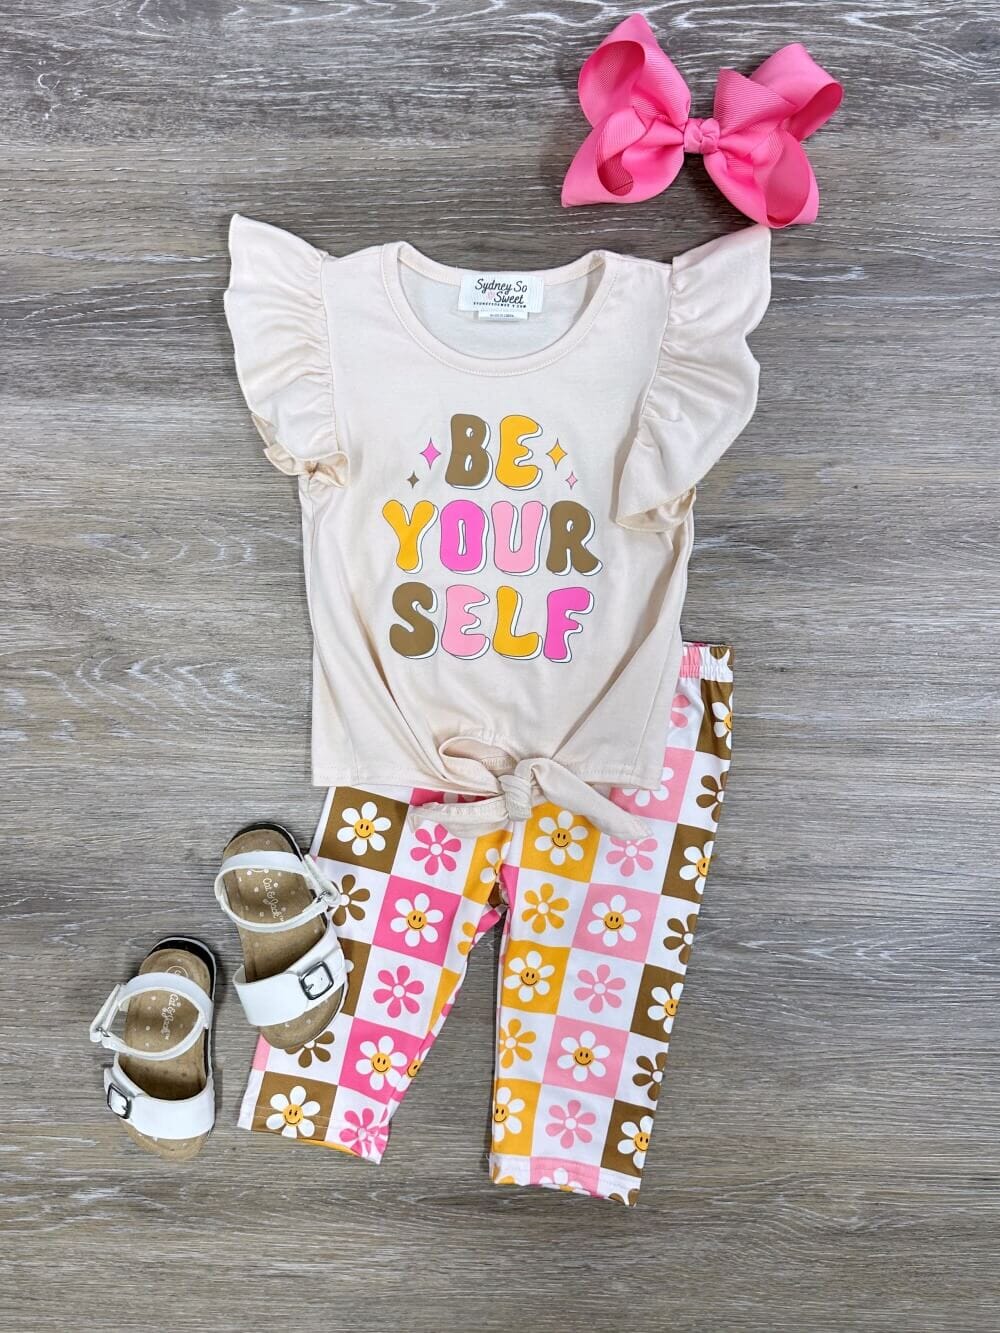 Be Yourself Retro Floral Girls Capri Outfit - Sydney So Sweet